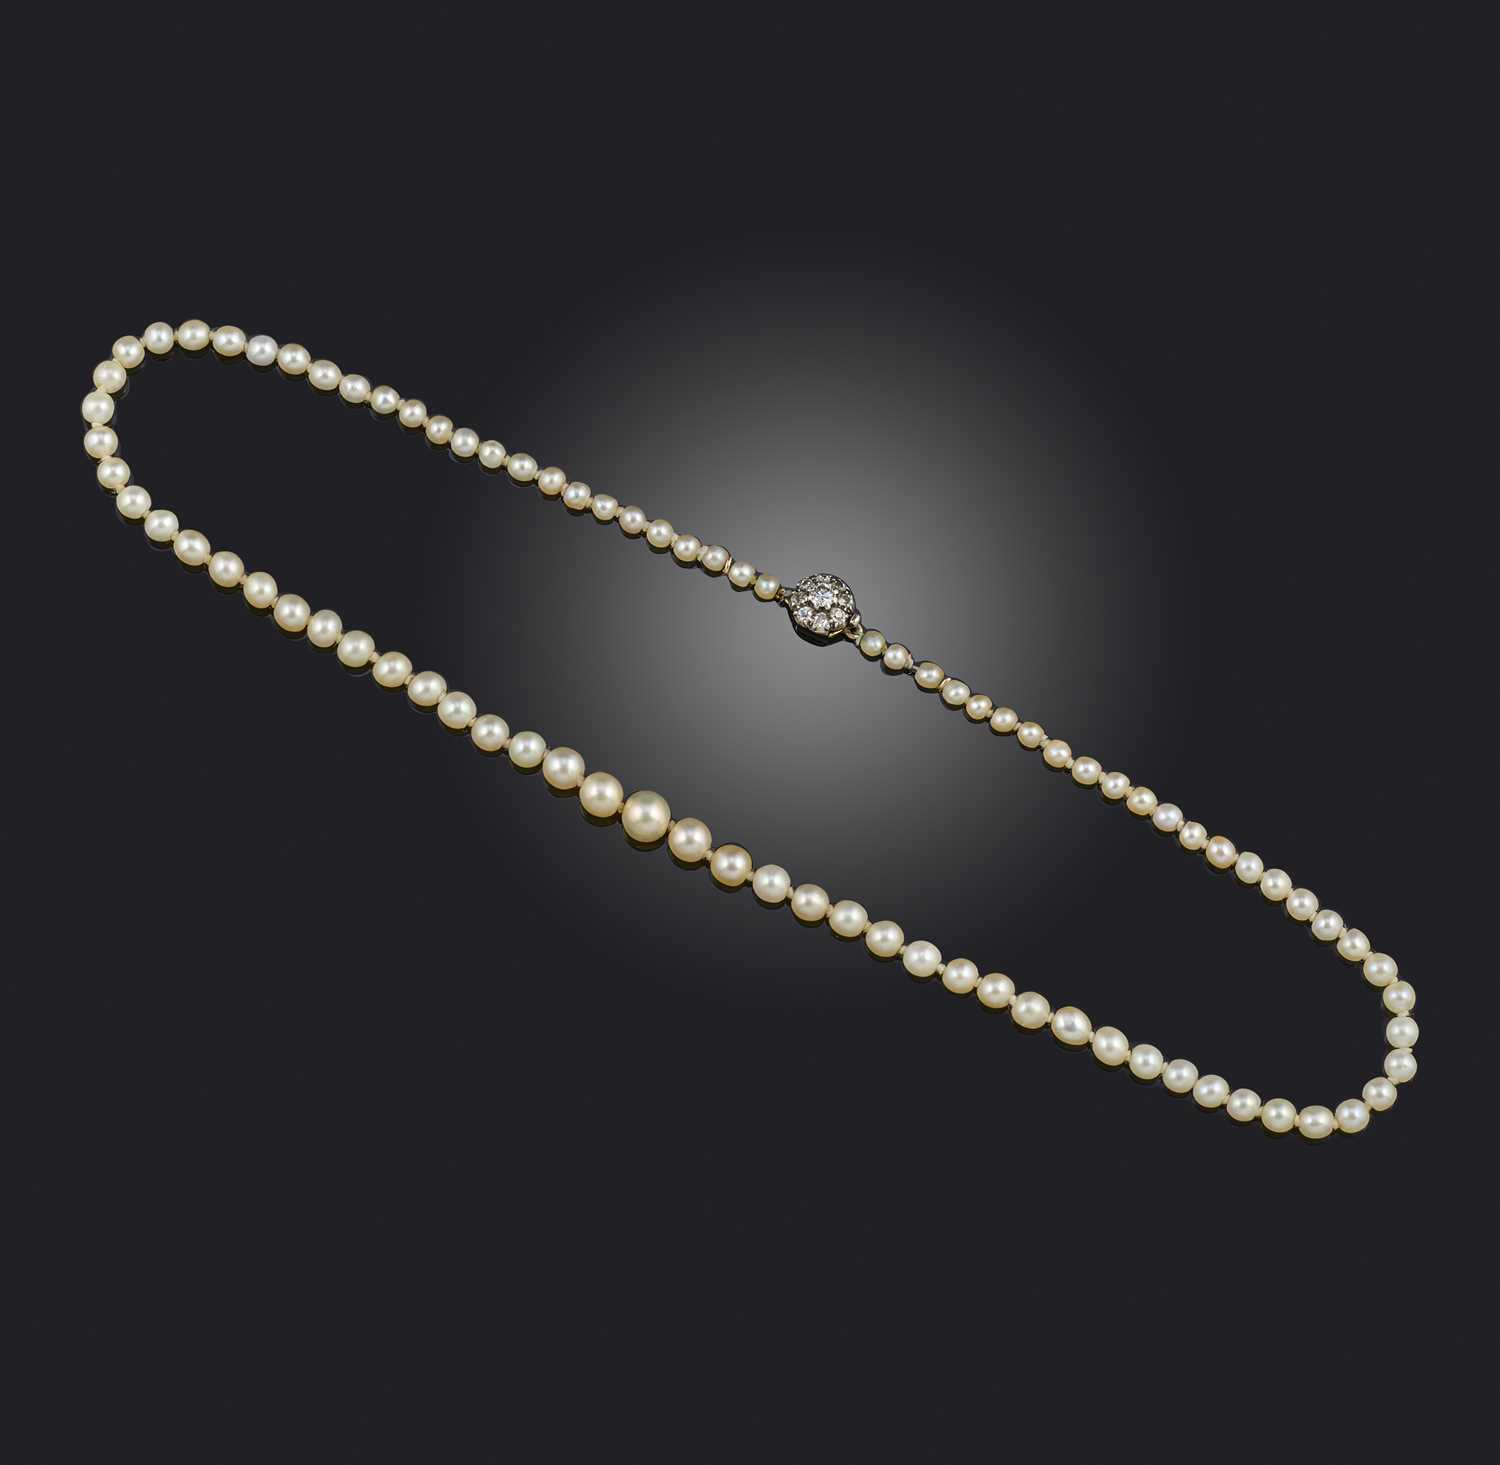 A natural pearl and diamond necklace, designed as a single strand of natural pearls measuring 2.7-